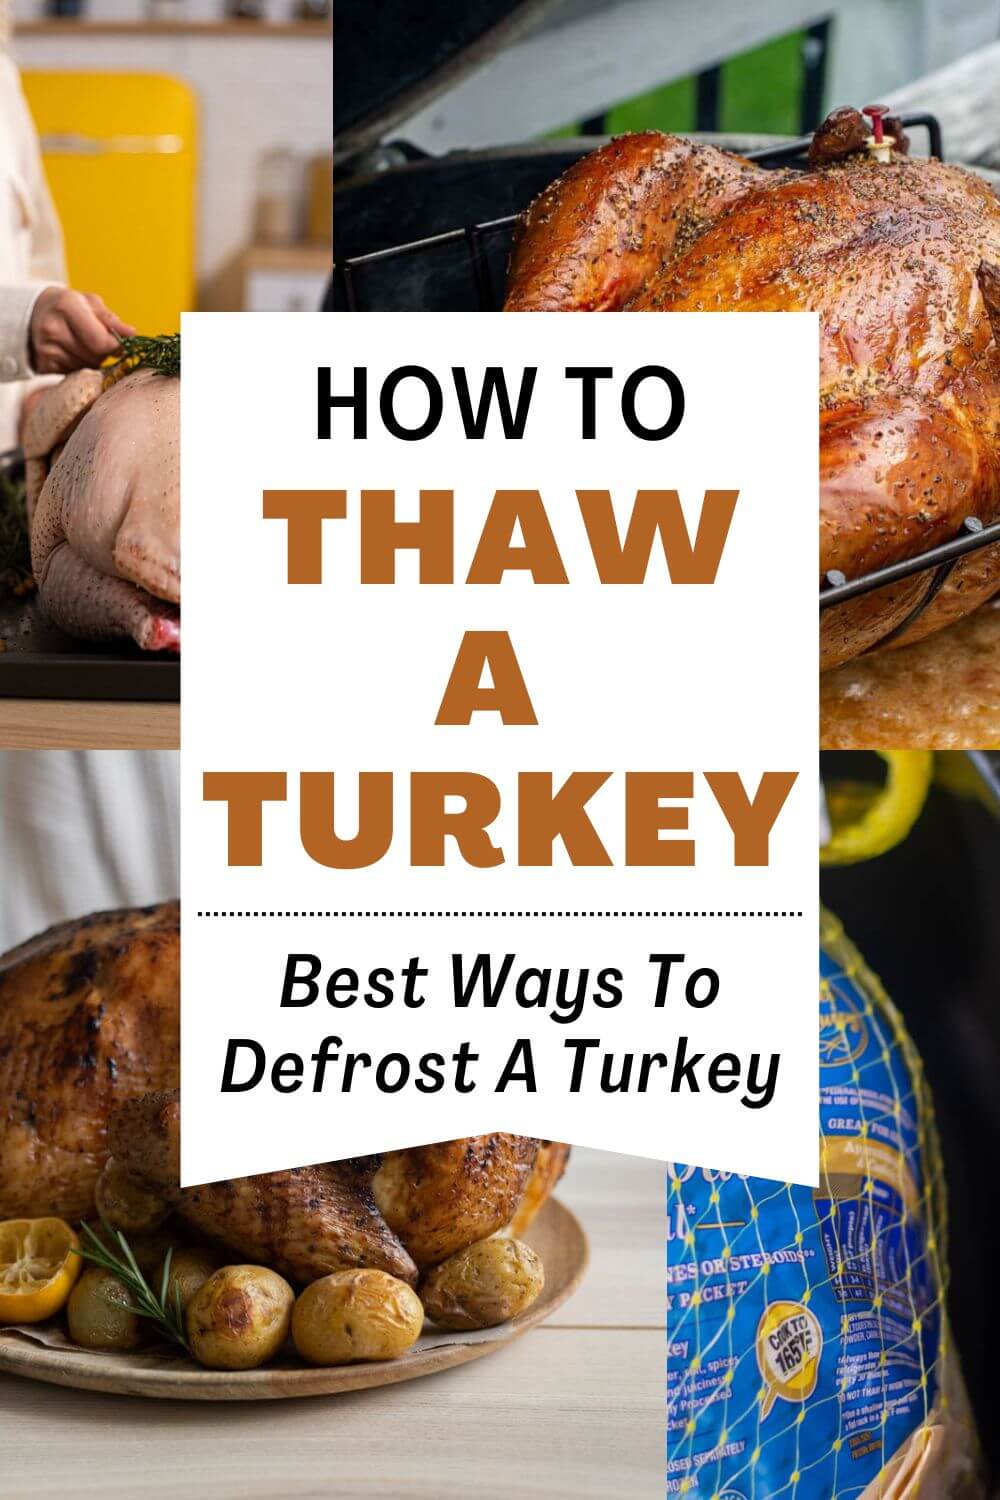 How To Thaw A Turkey